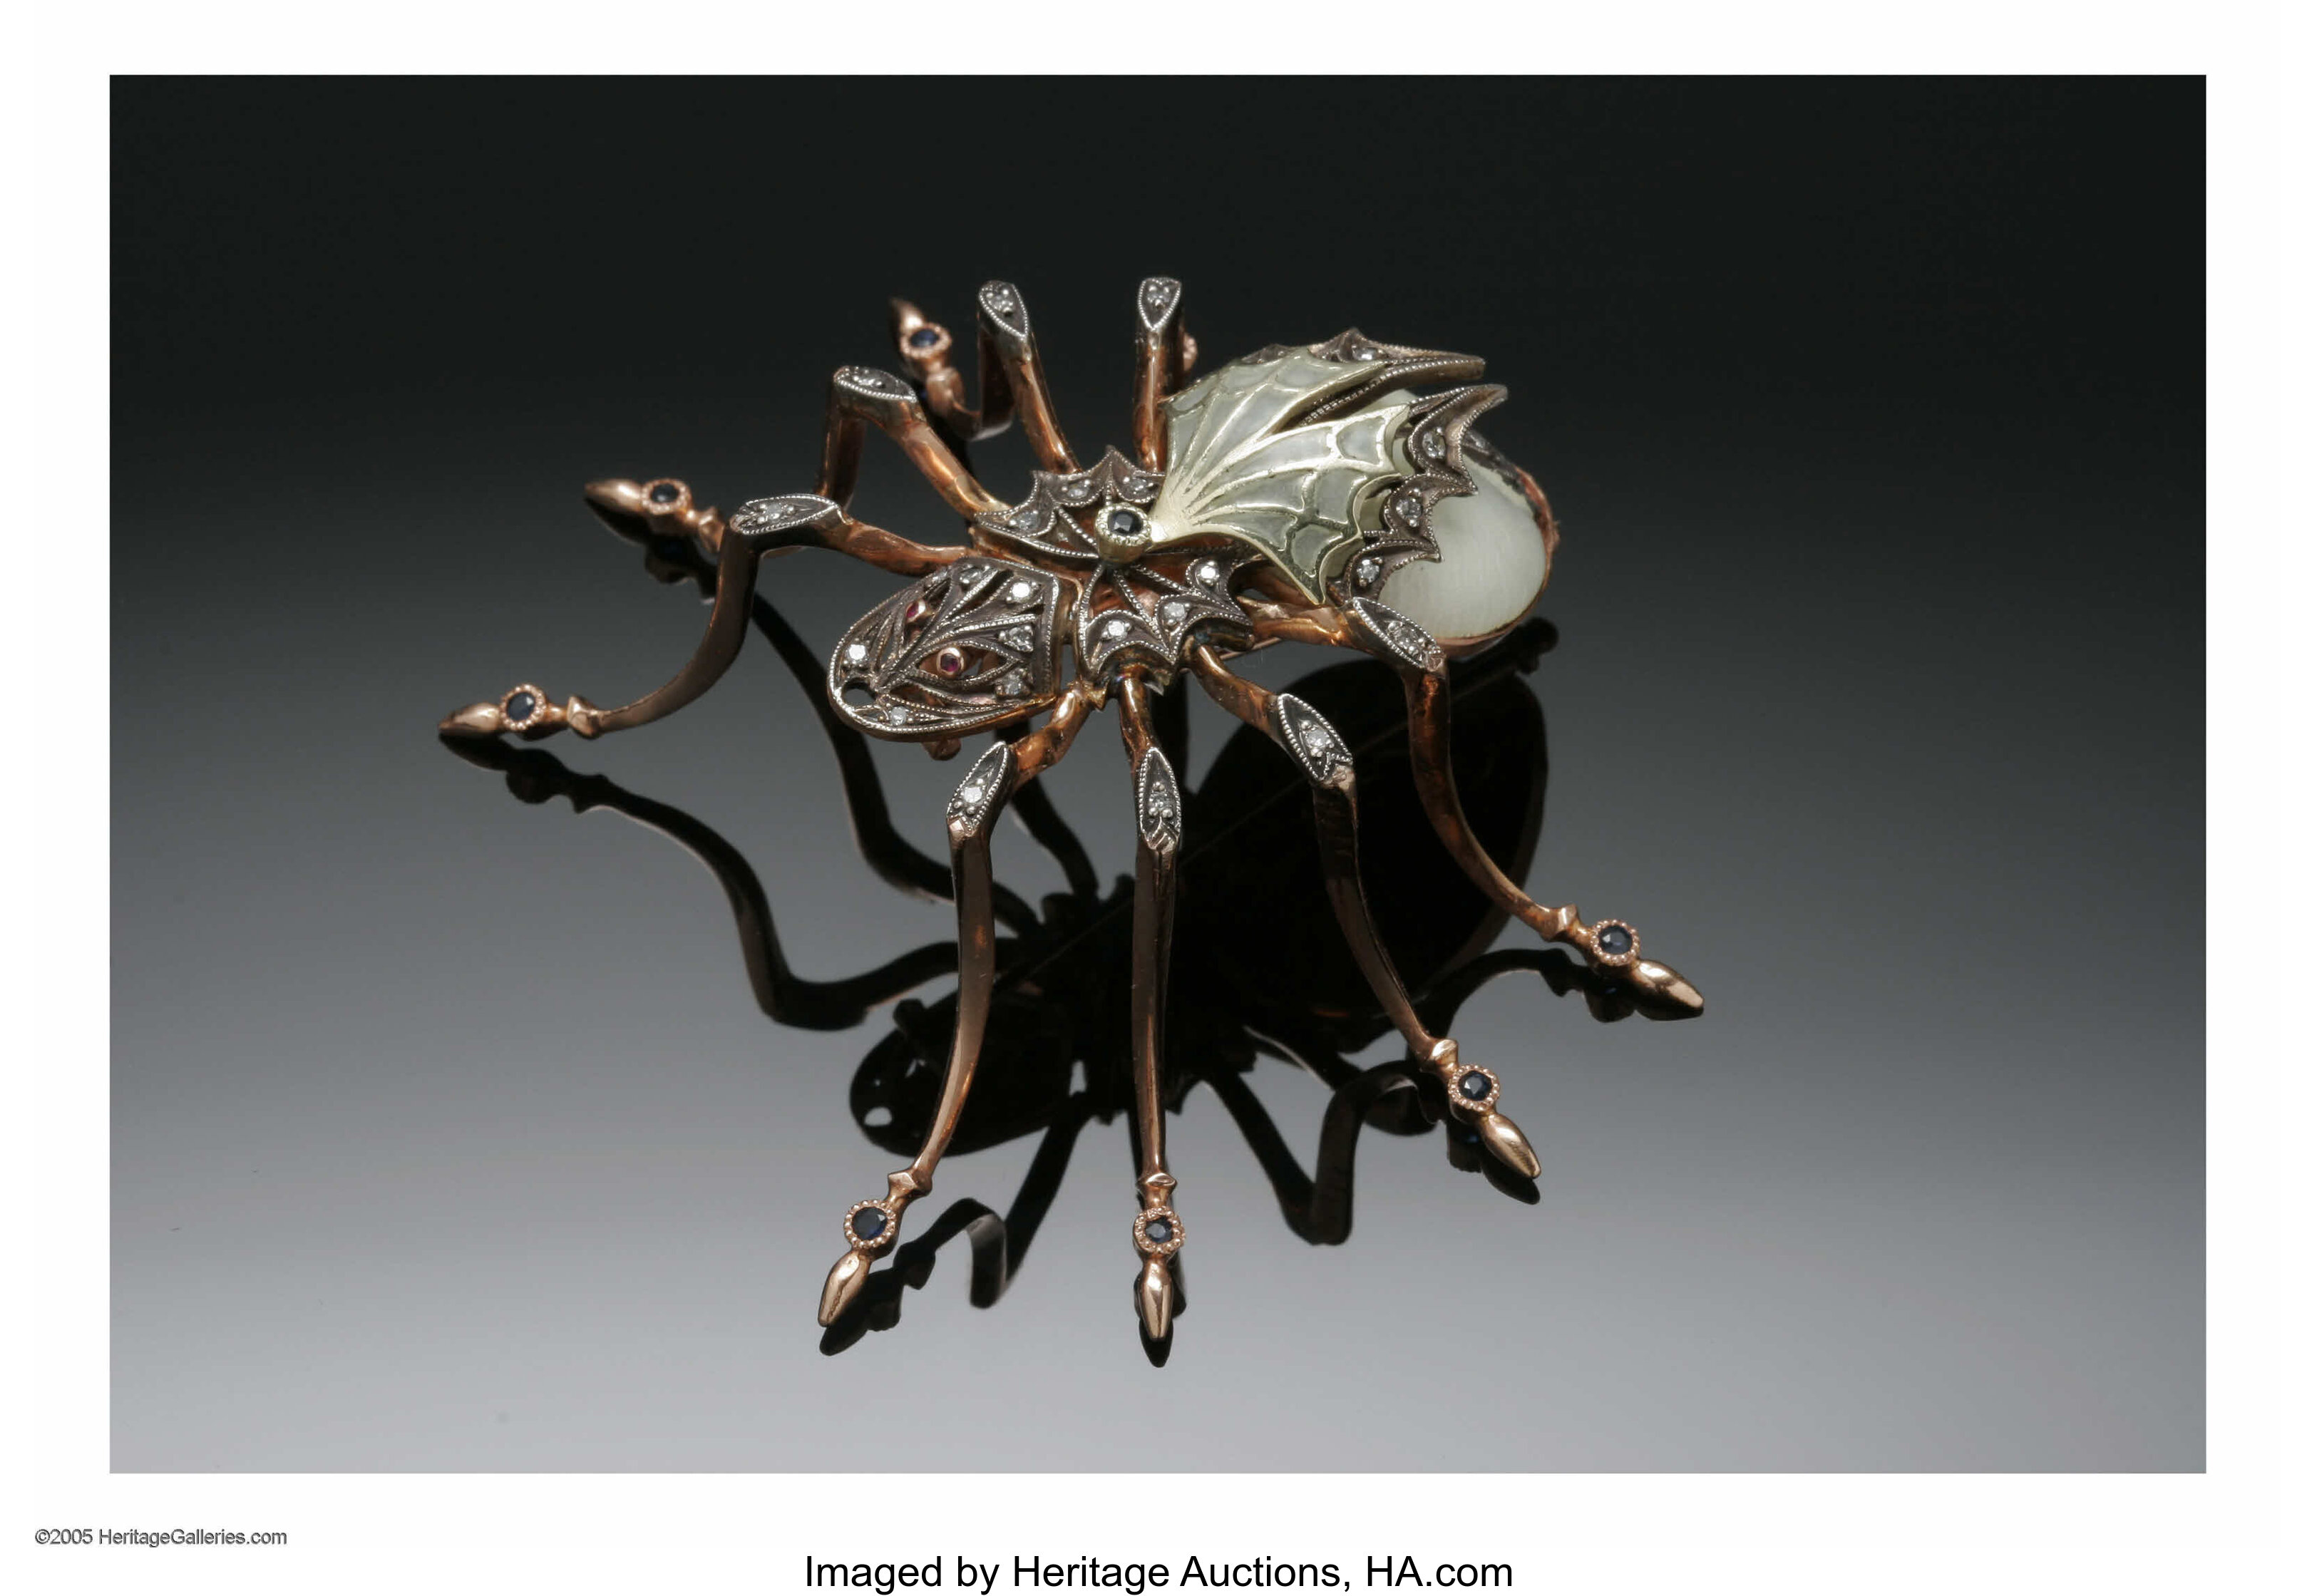 Faberge Spider Brooch  Faberge jewelry, Spider jewelry, Brooch